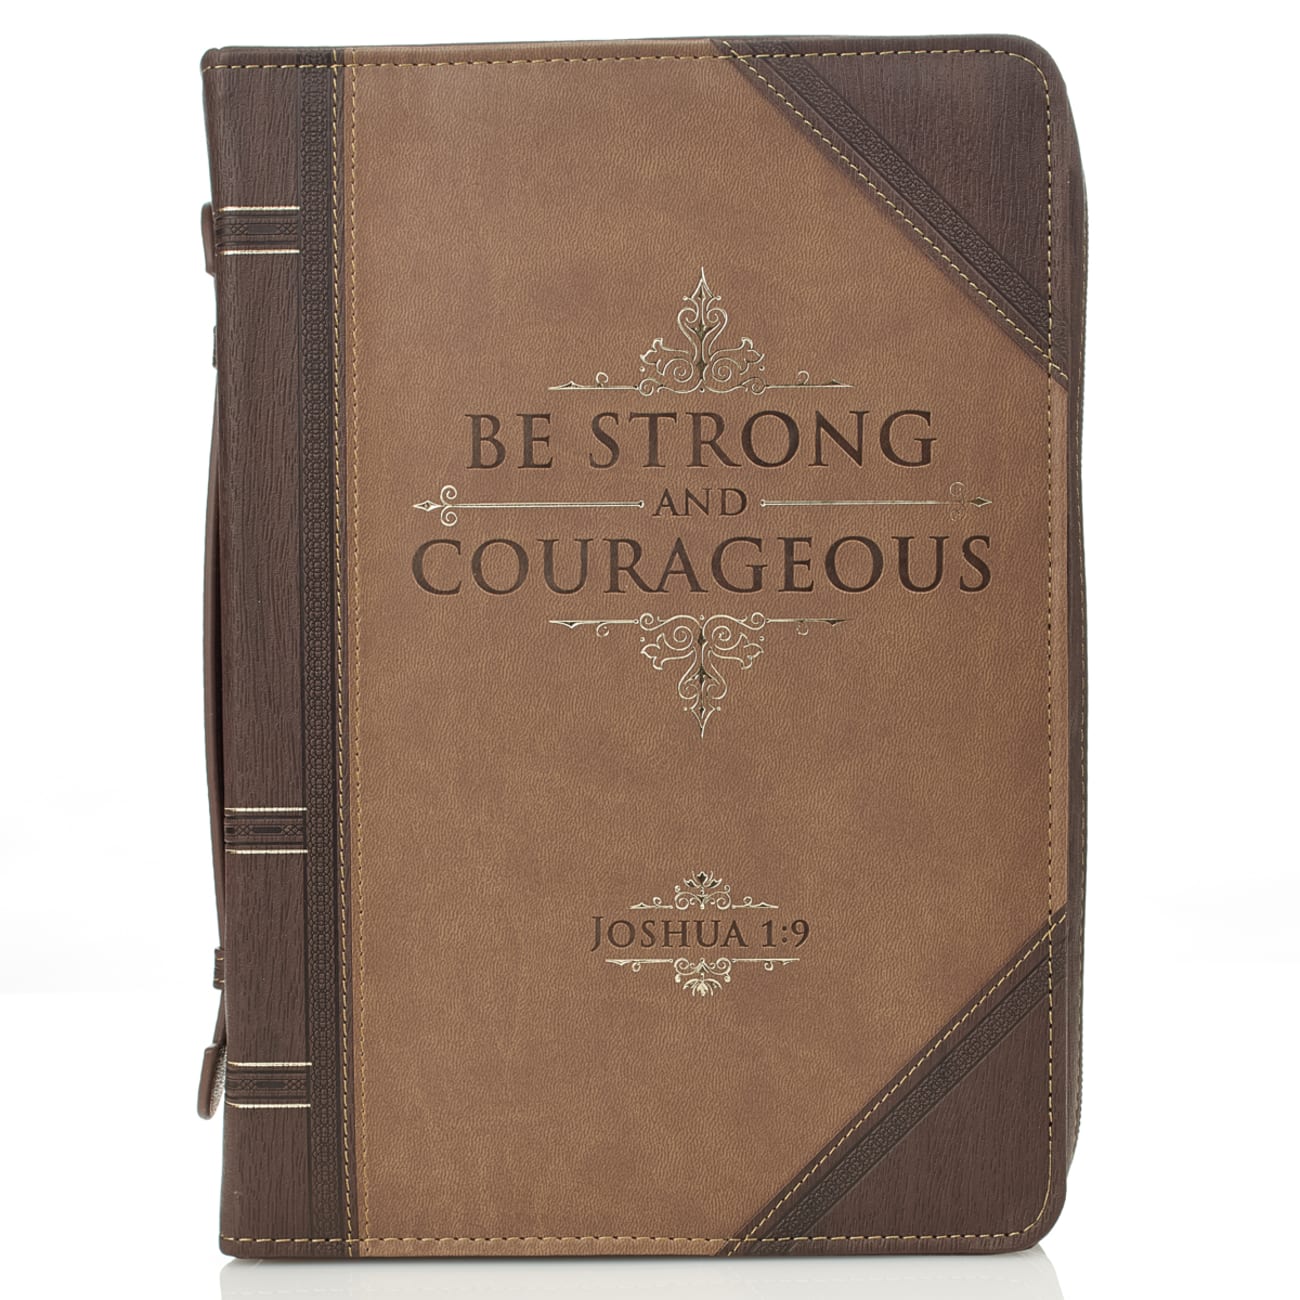 Bible Cover Extra Large: Be Strong & Courageous, Beige/Brown (Joshua 1:9) Bible Cover